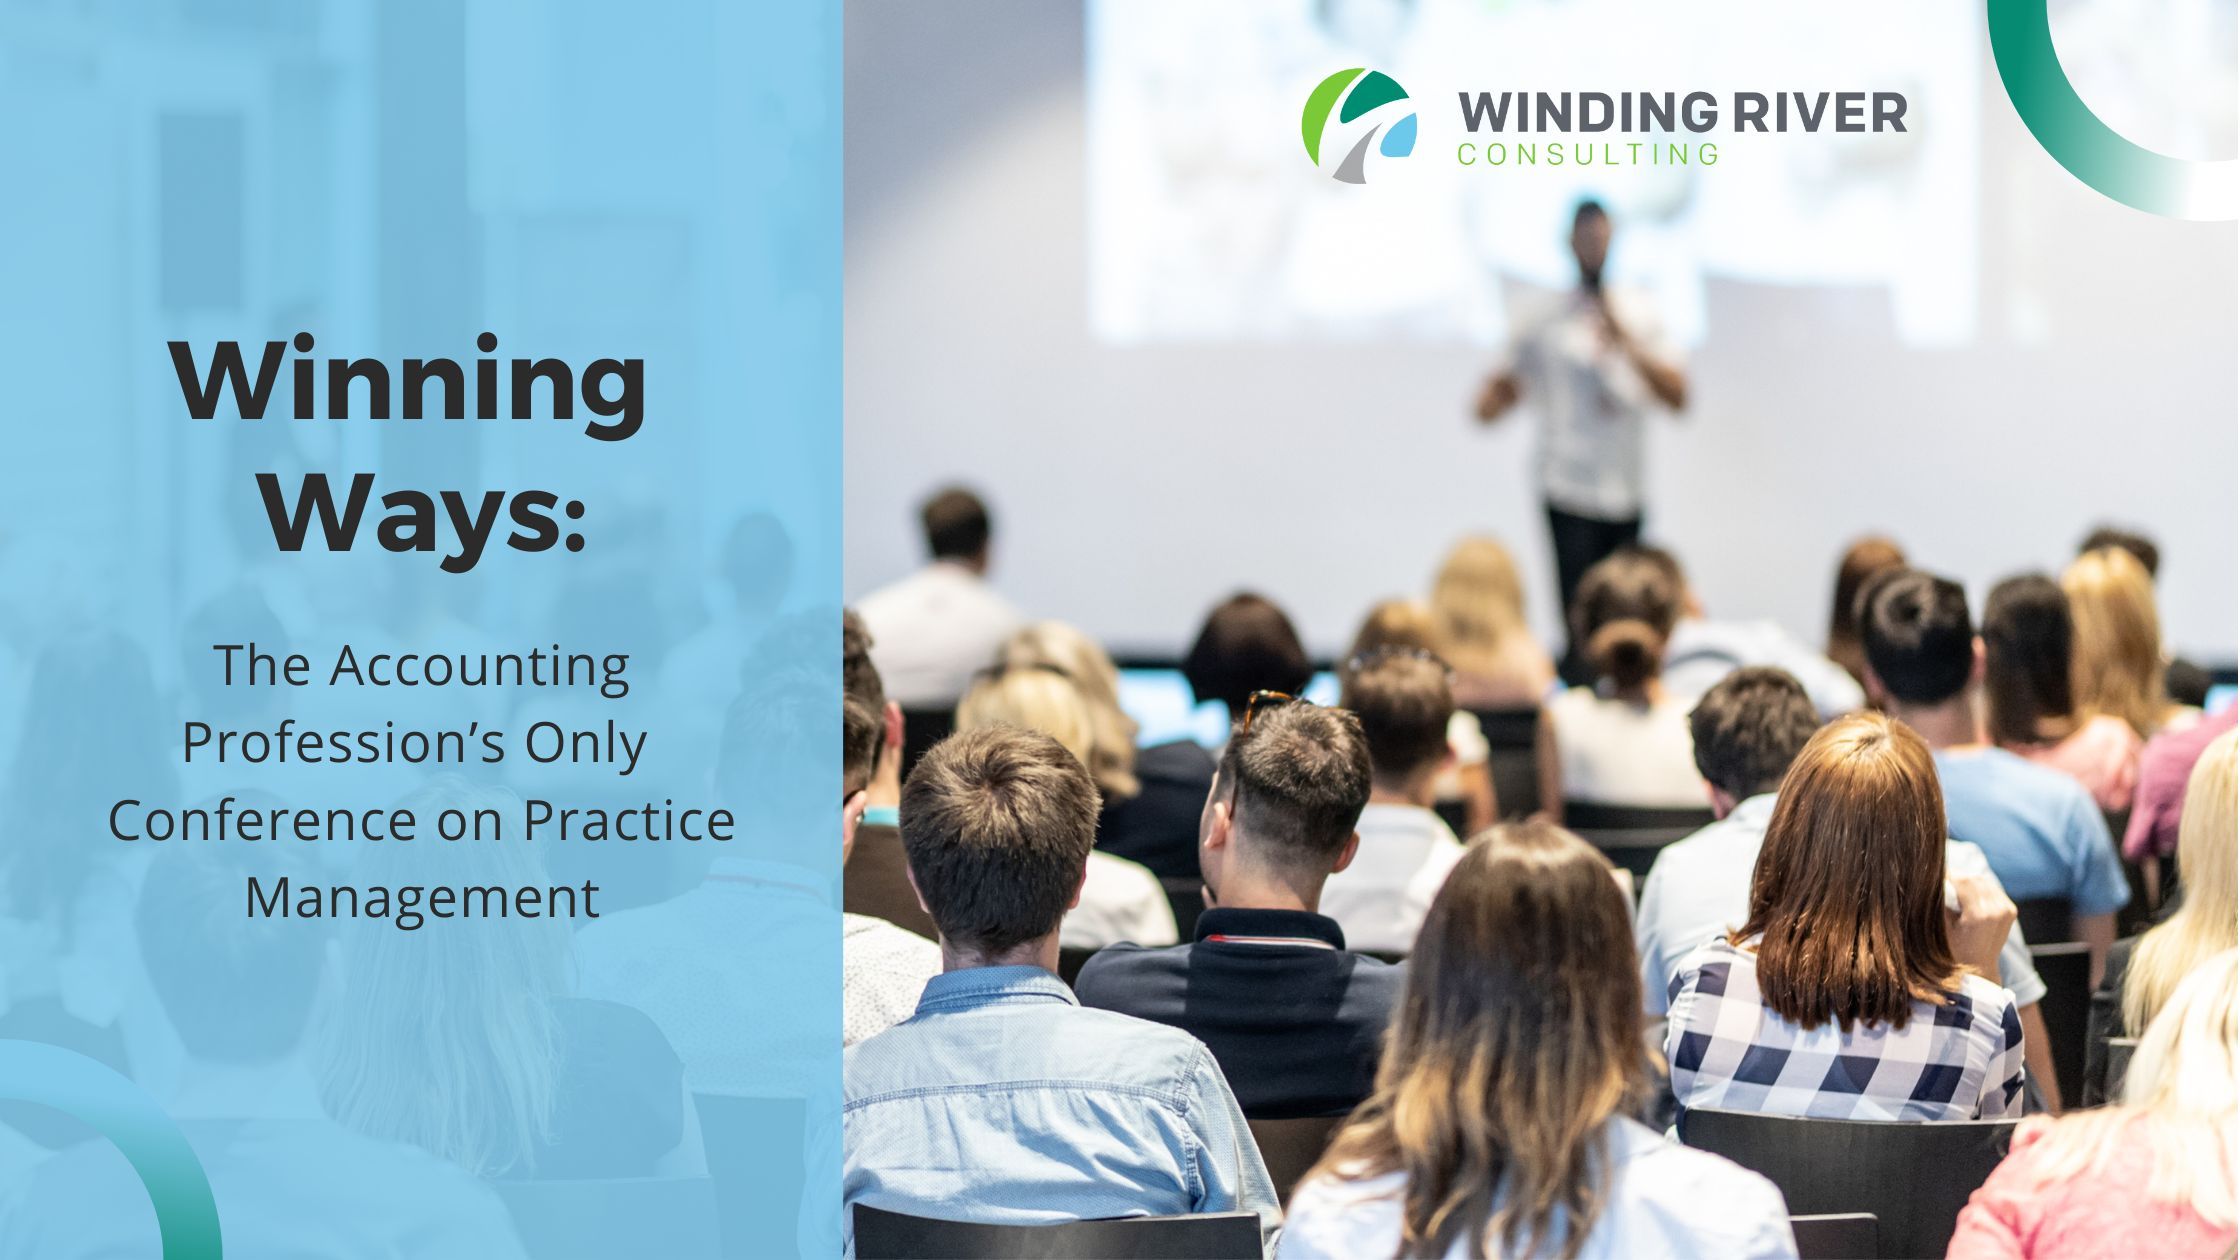 Winning Ways: The Accounting Profession’s Only Conference on Practice Management